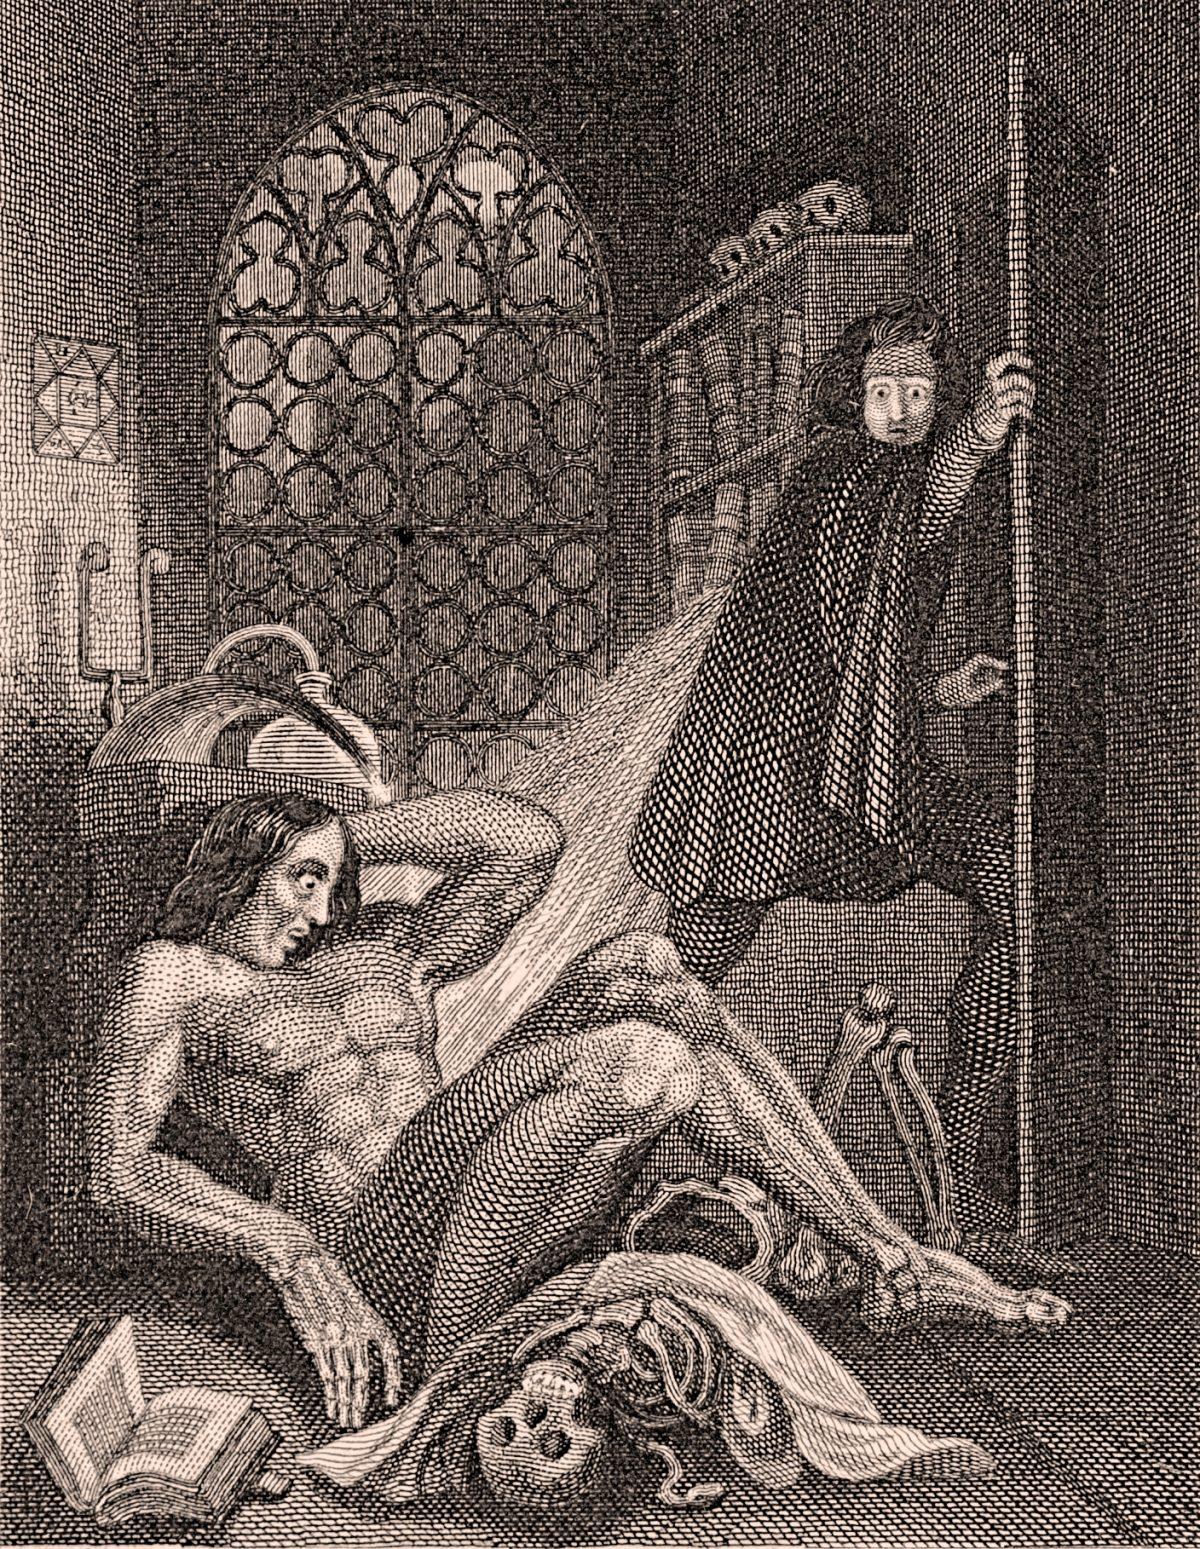 Victor Frankenstein becoming disgusted at his creation. Steel engraving by Theodor von Holst from the frontispiece of the 1831 revised edition of “Frankenstein” by Mary Shelley, published by Colburn and Bentley, London 1831. The novel was first published in 1818. (Public domain)